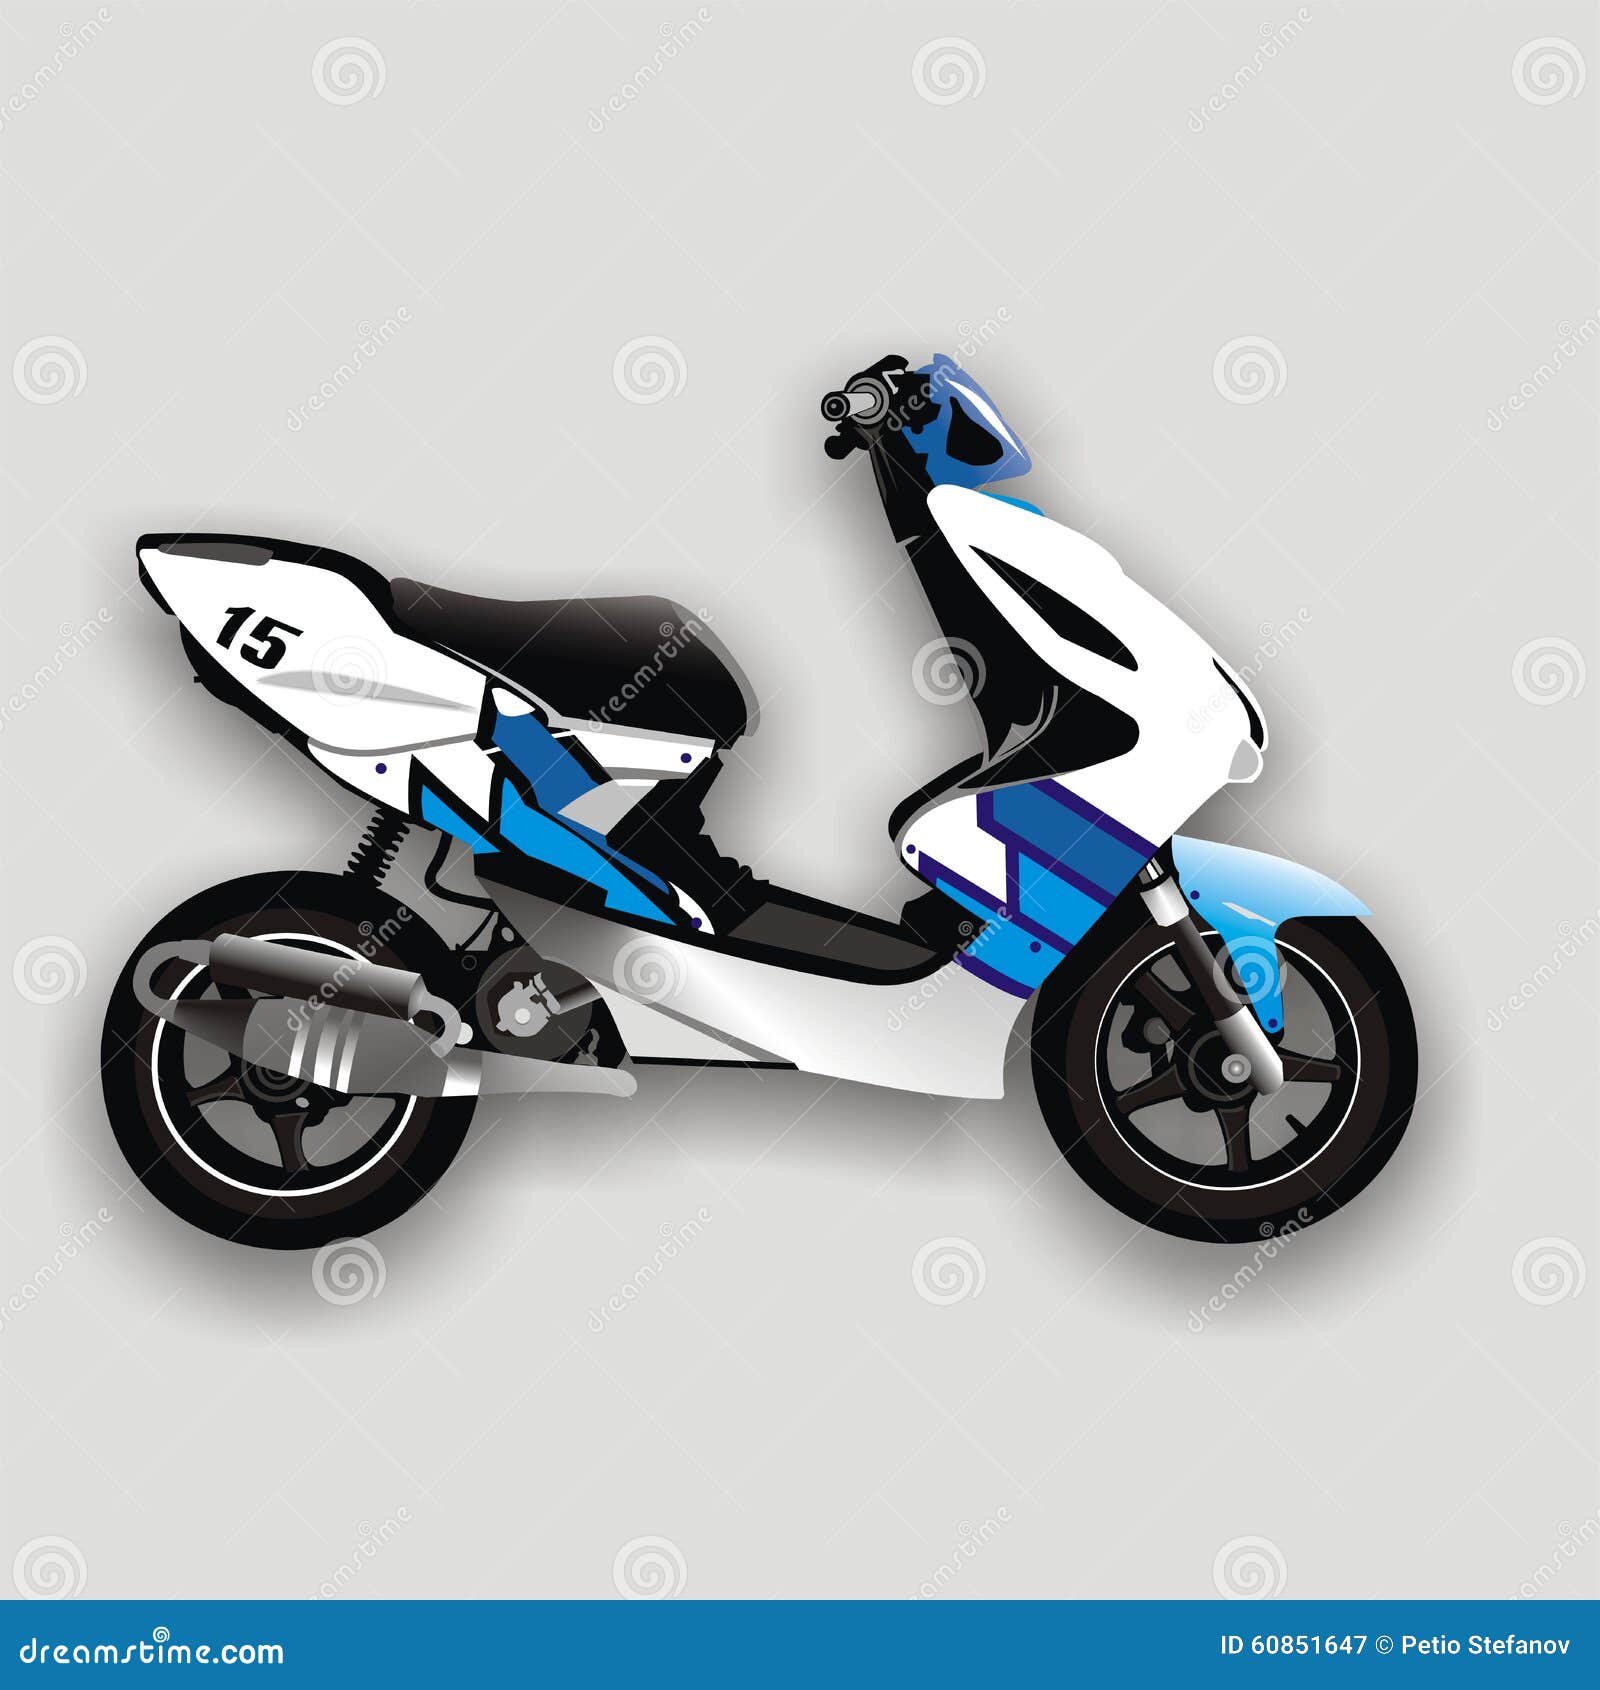 Scooter yamaha  aerox  stock vector Illustration of scooter 